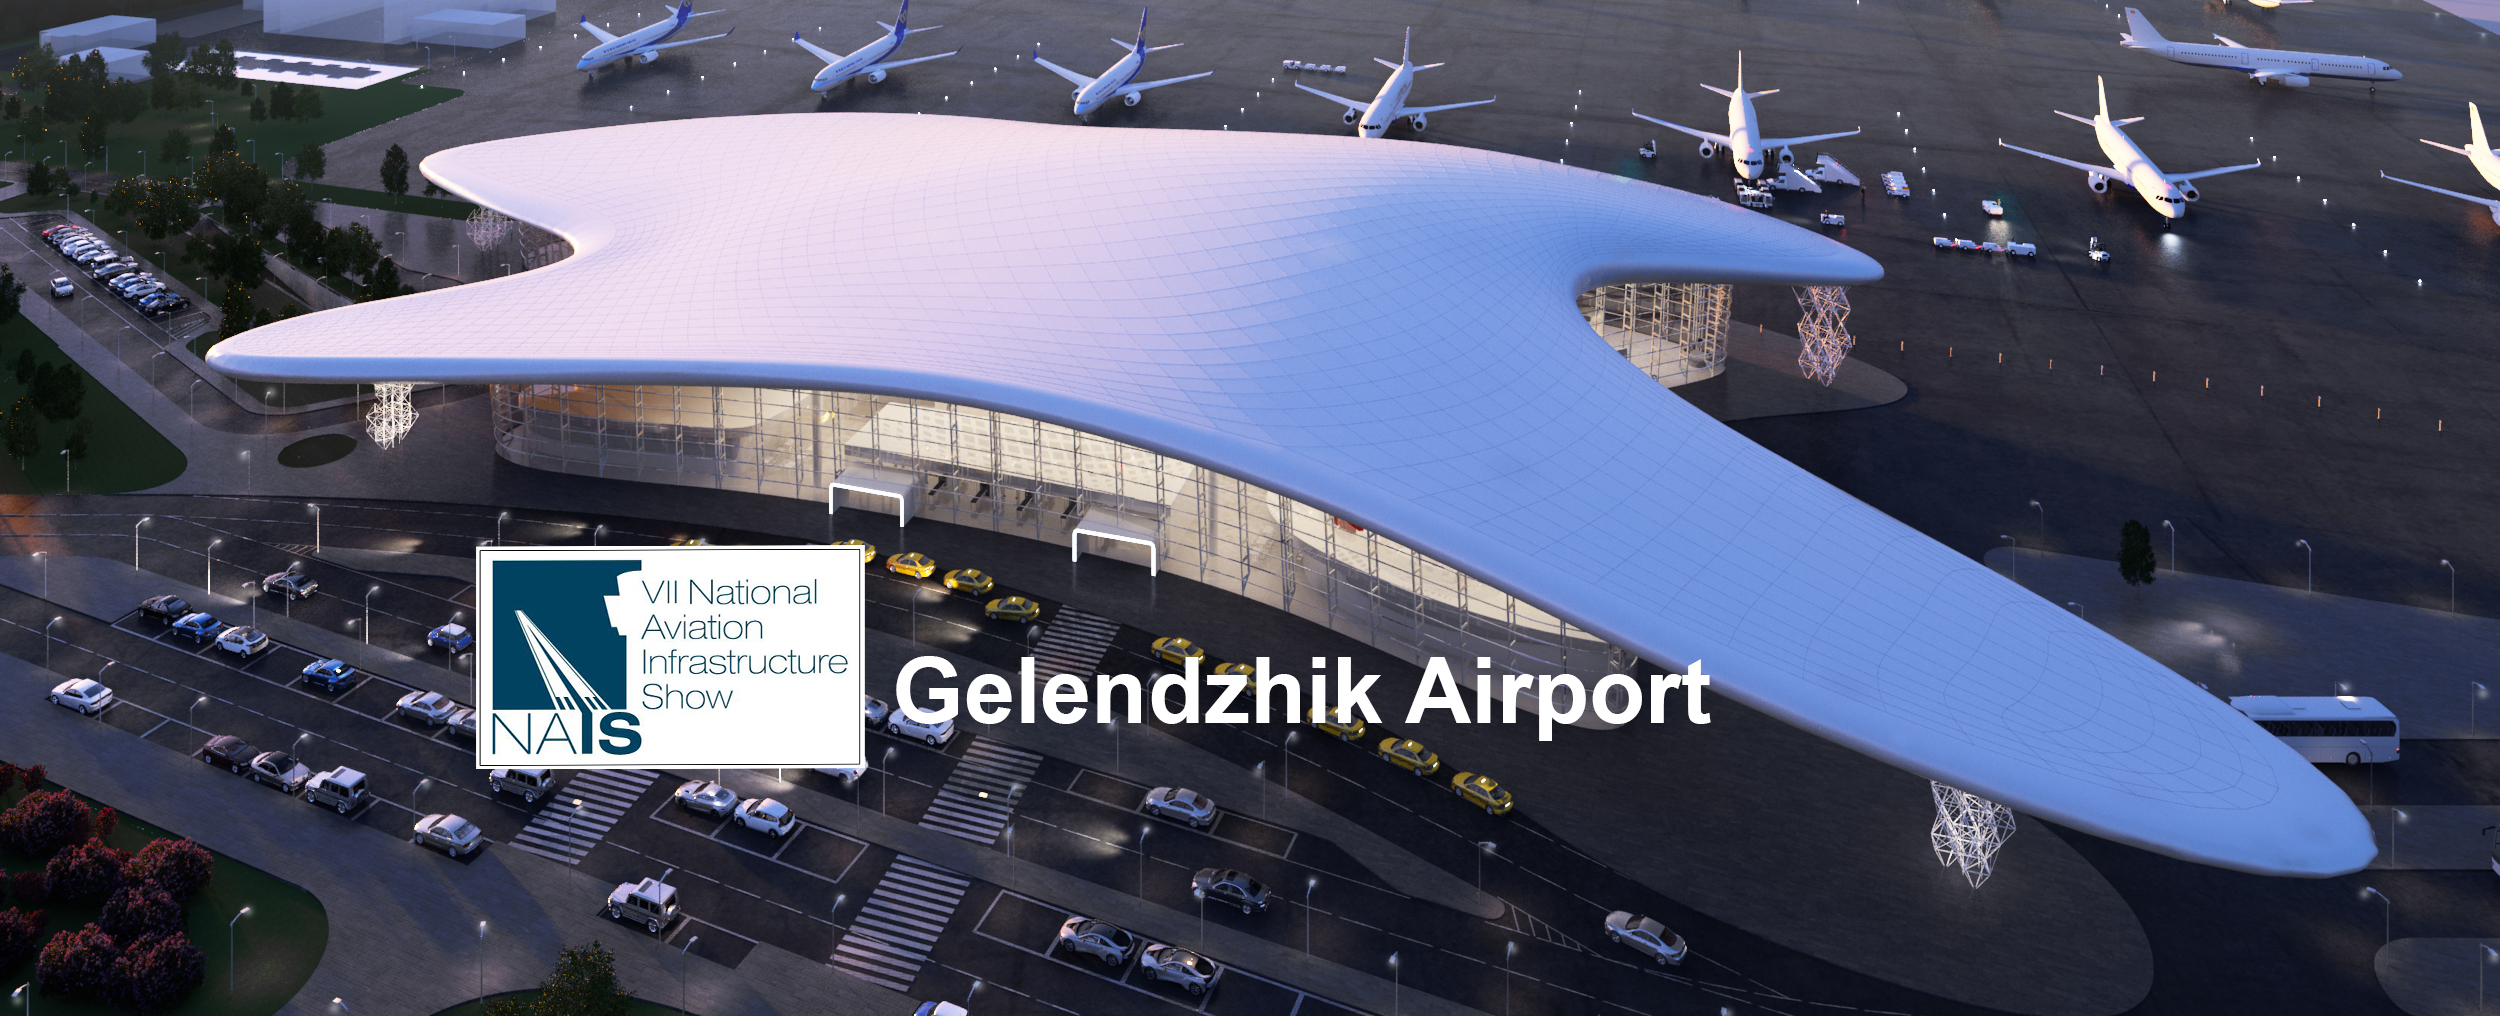 Gelendzhik Airport awarded best investment project of 2020 at NAIS -20212021, February 22